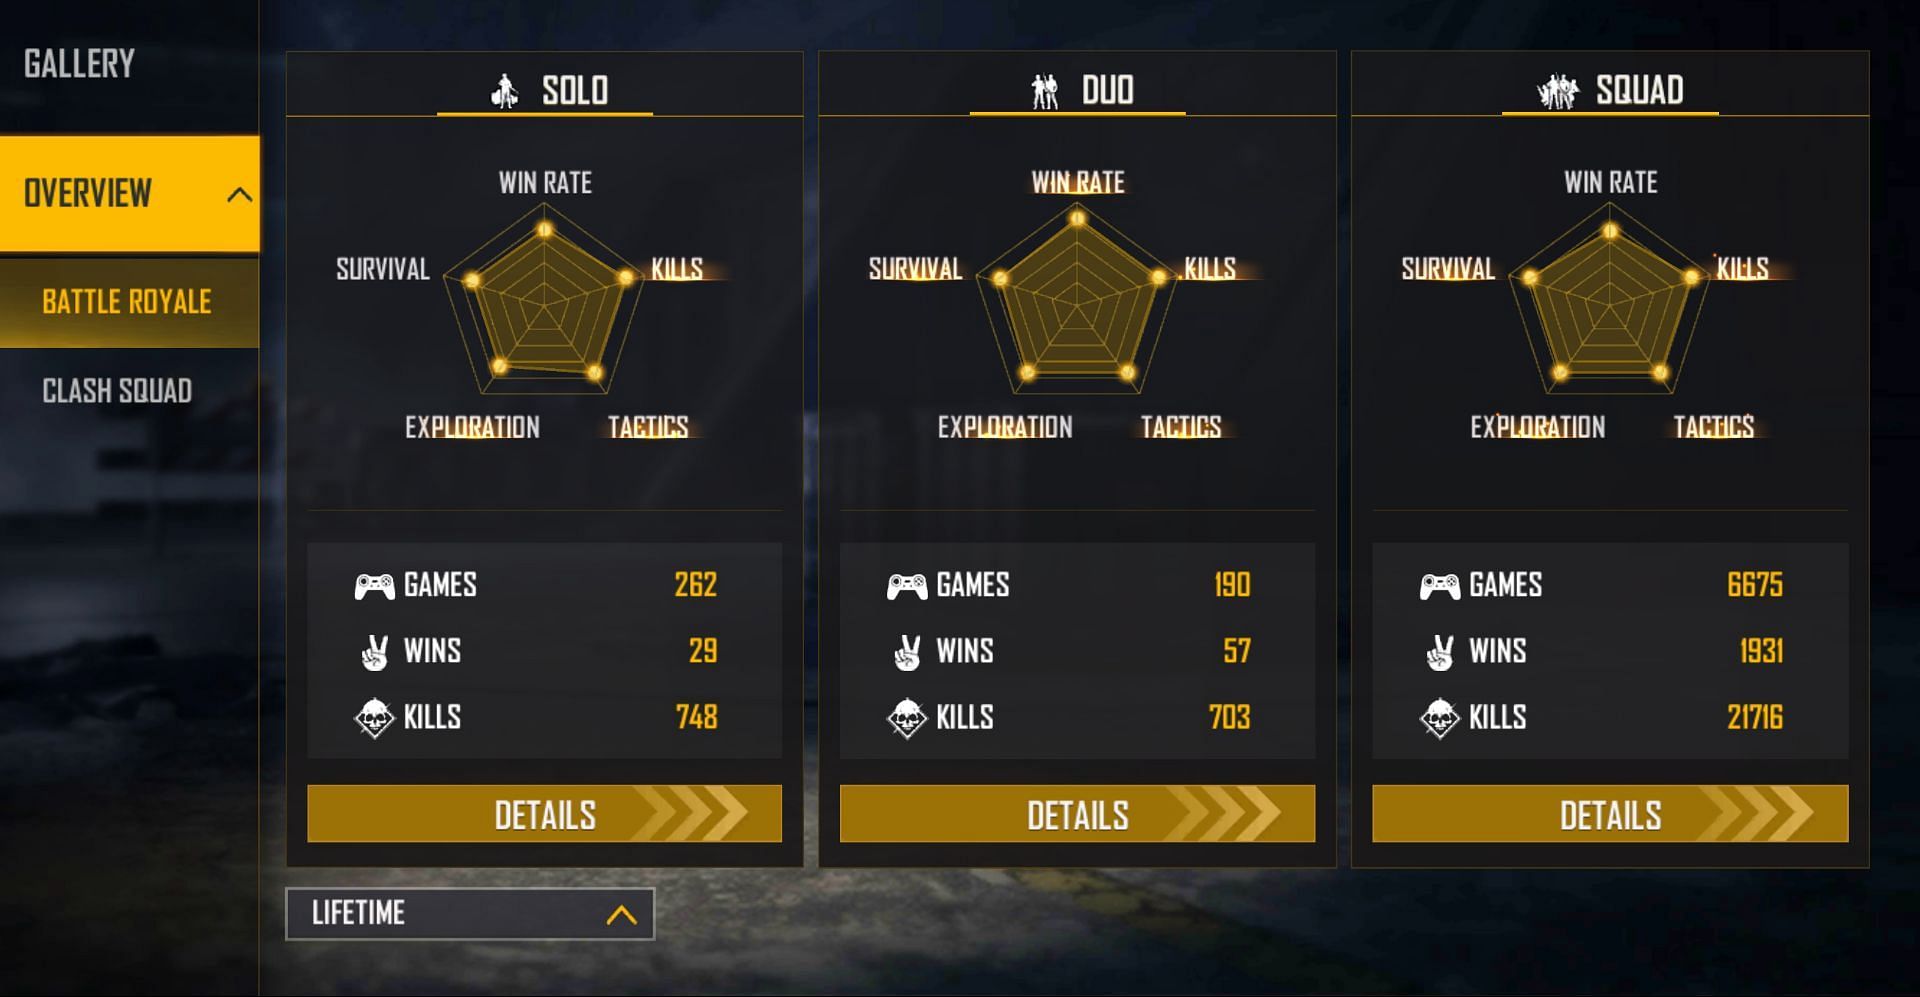 TG Delete has played more solo games than duo matches (Image via Free Fire)